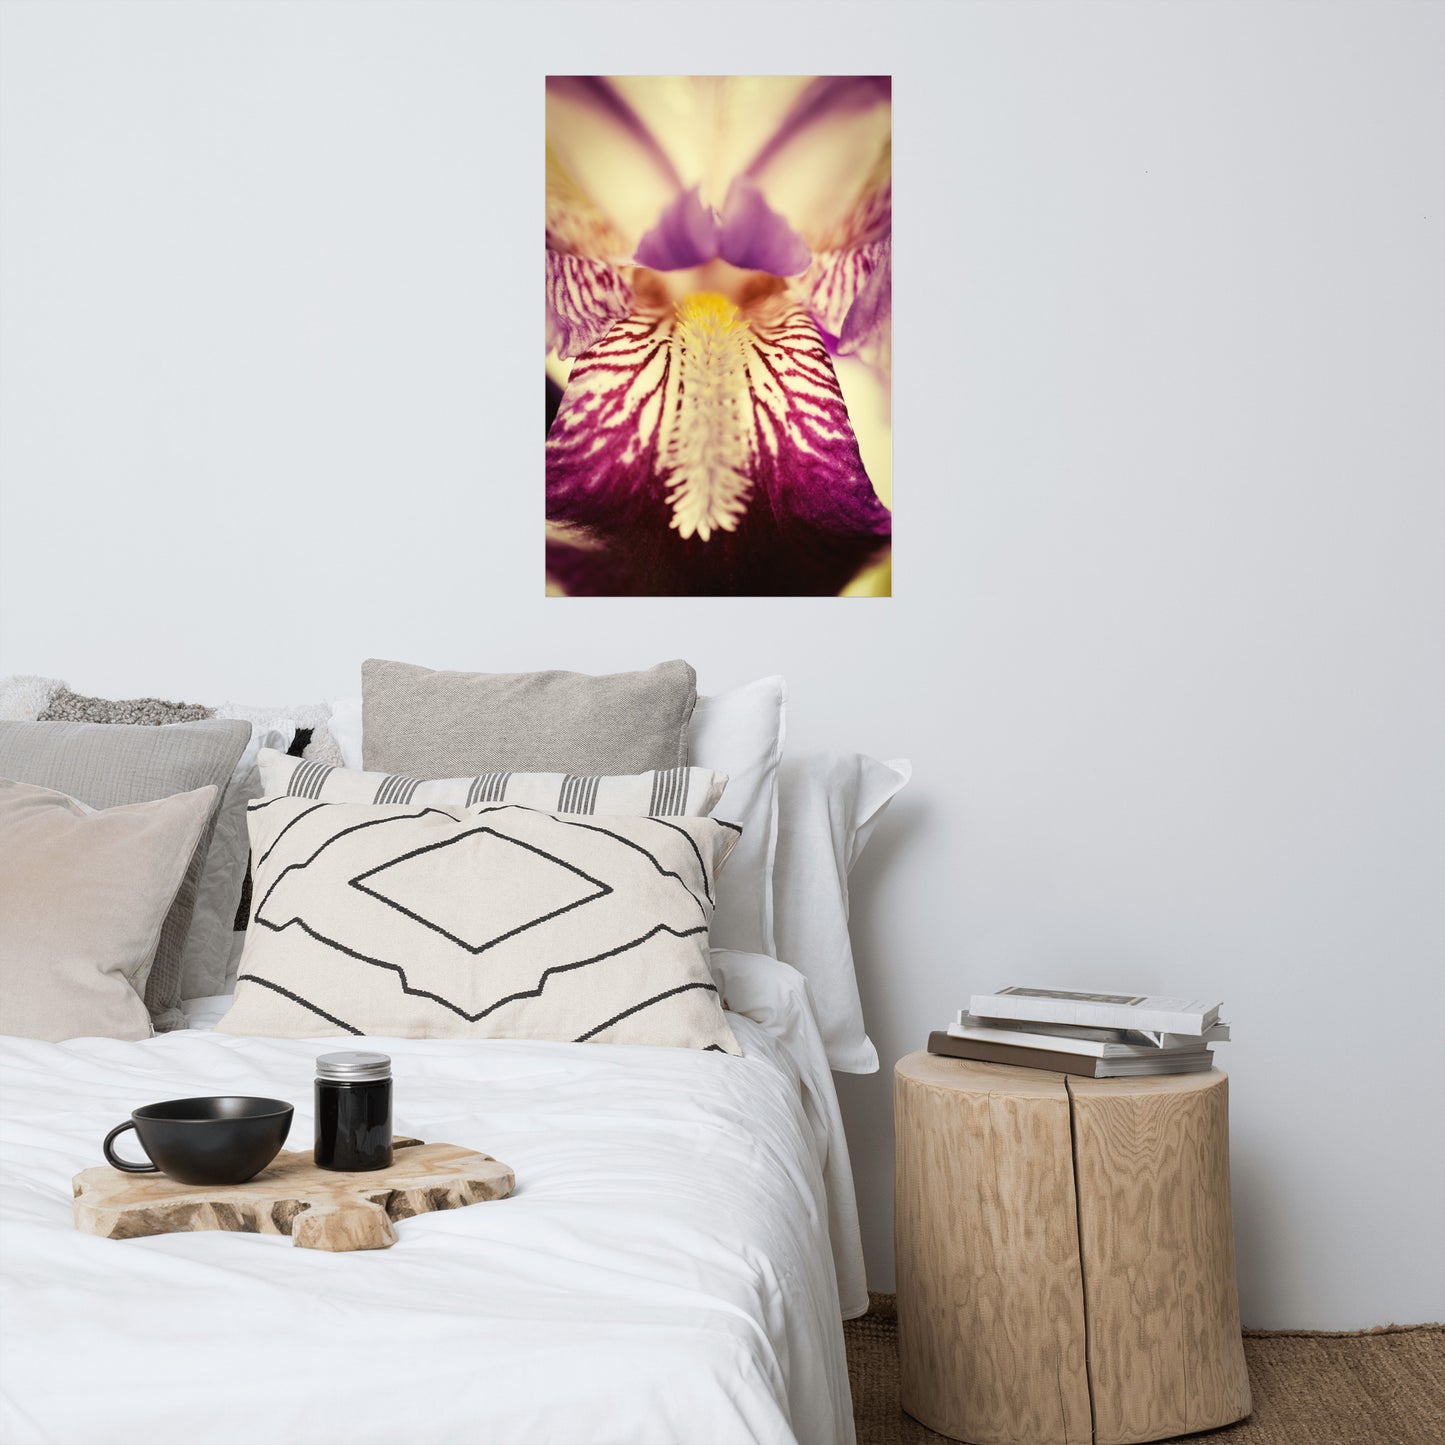 Floral Pictures For Wall: Antiqued Iris - Botanical / Floral / Flora / Flowers / Nature Photograph Loose / Unframed / Frameless / Frameable Wall Art Print - Artwork